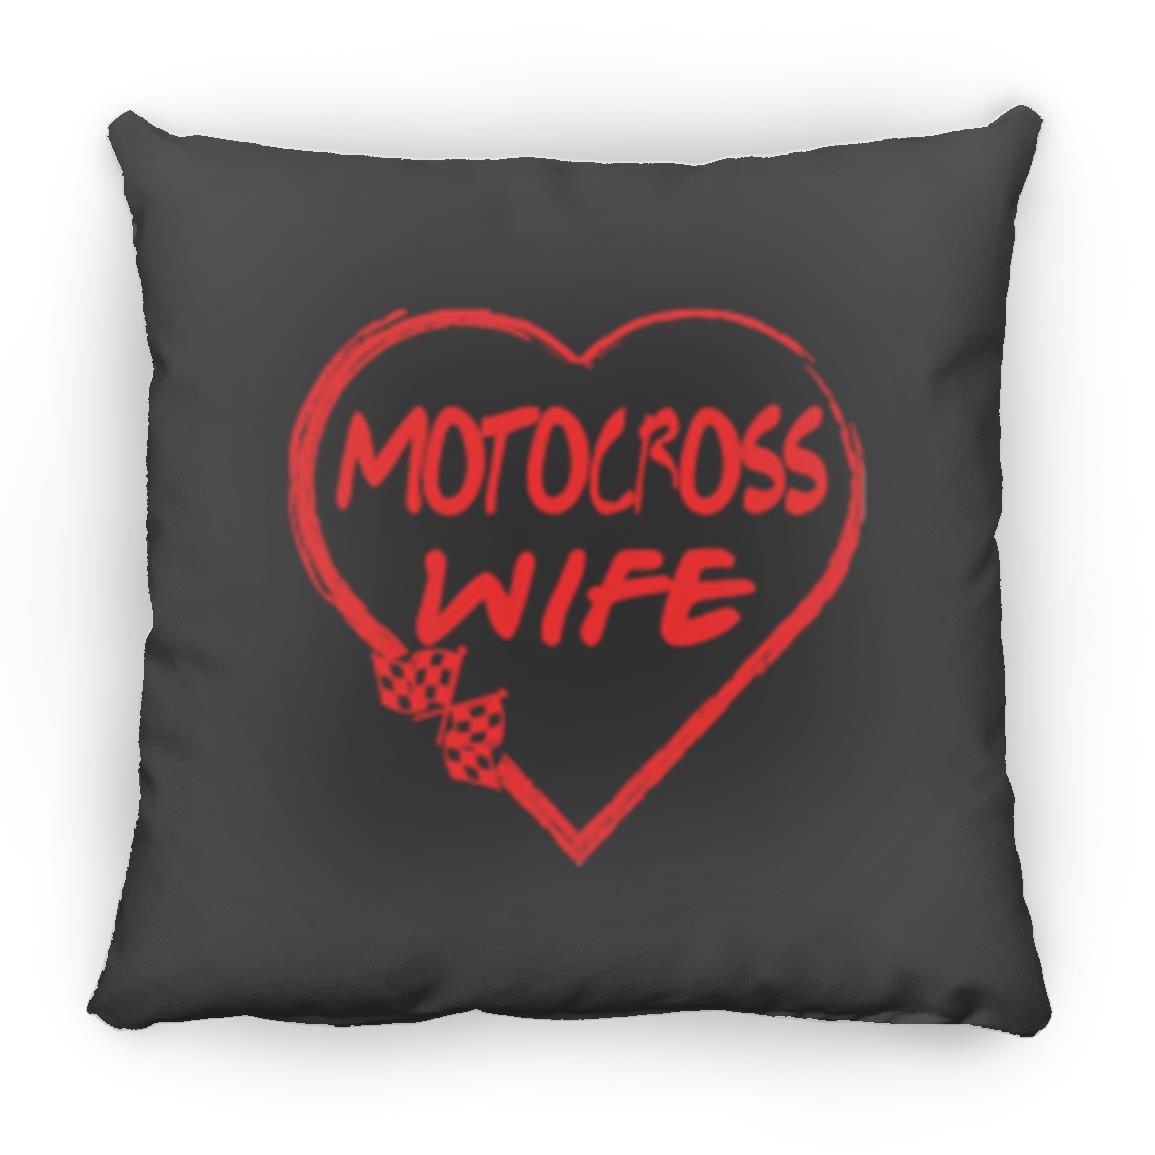 Motocross Wife Small Square Pillow